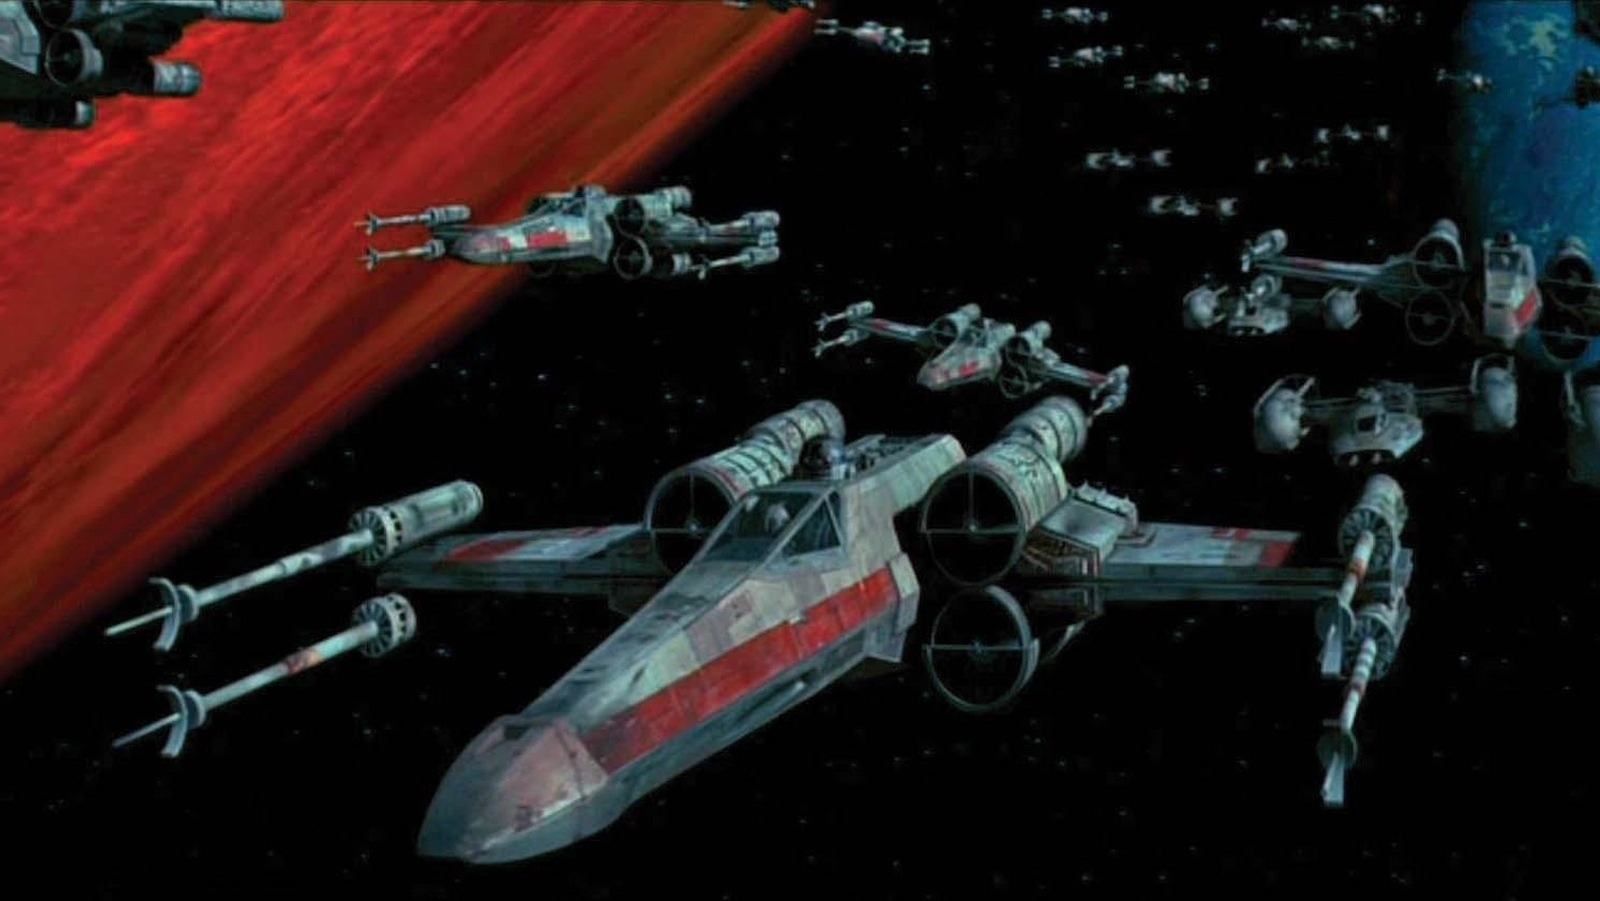 #Rogue Squadron Is Still Coming In 2023, According To Disney